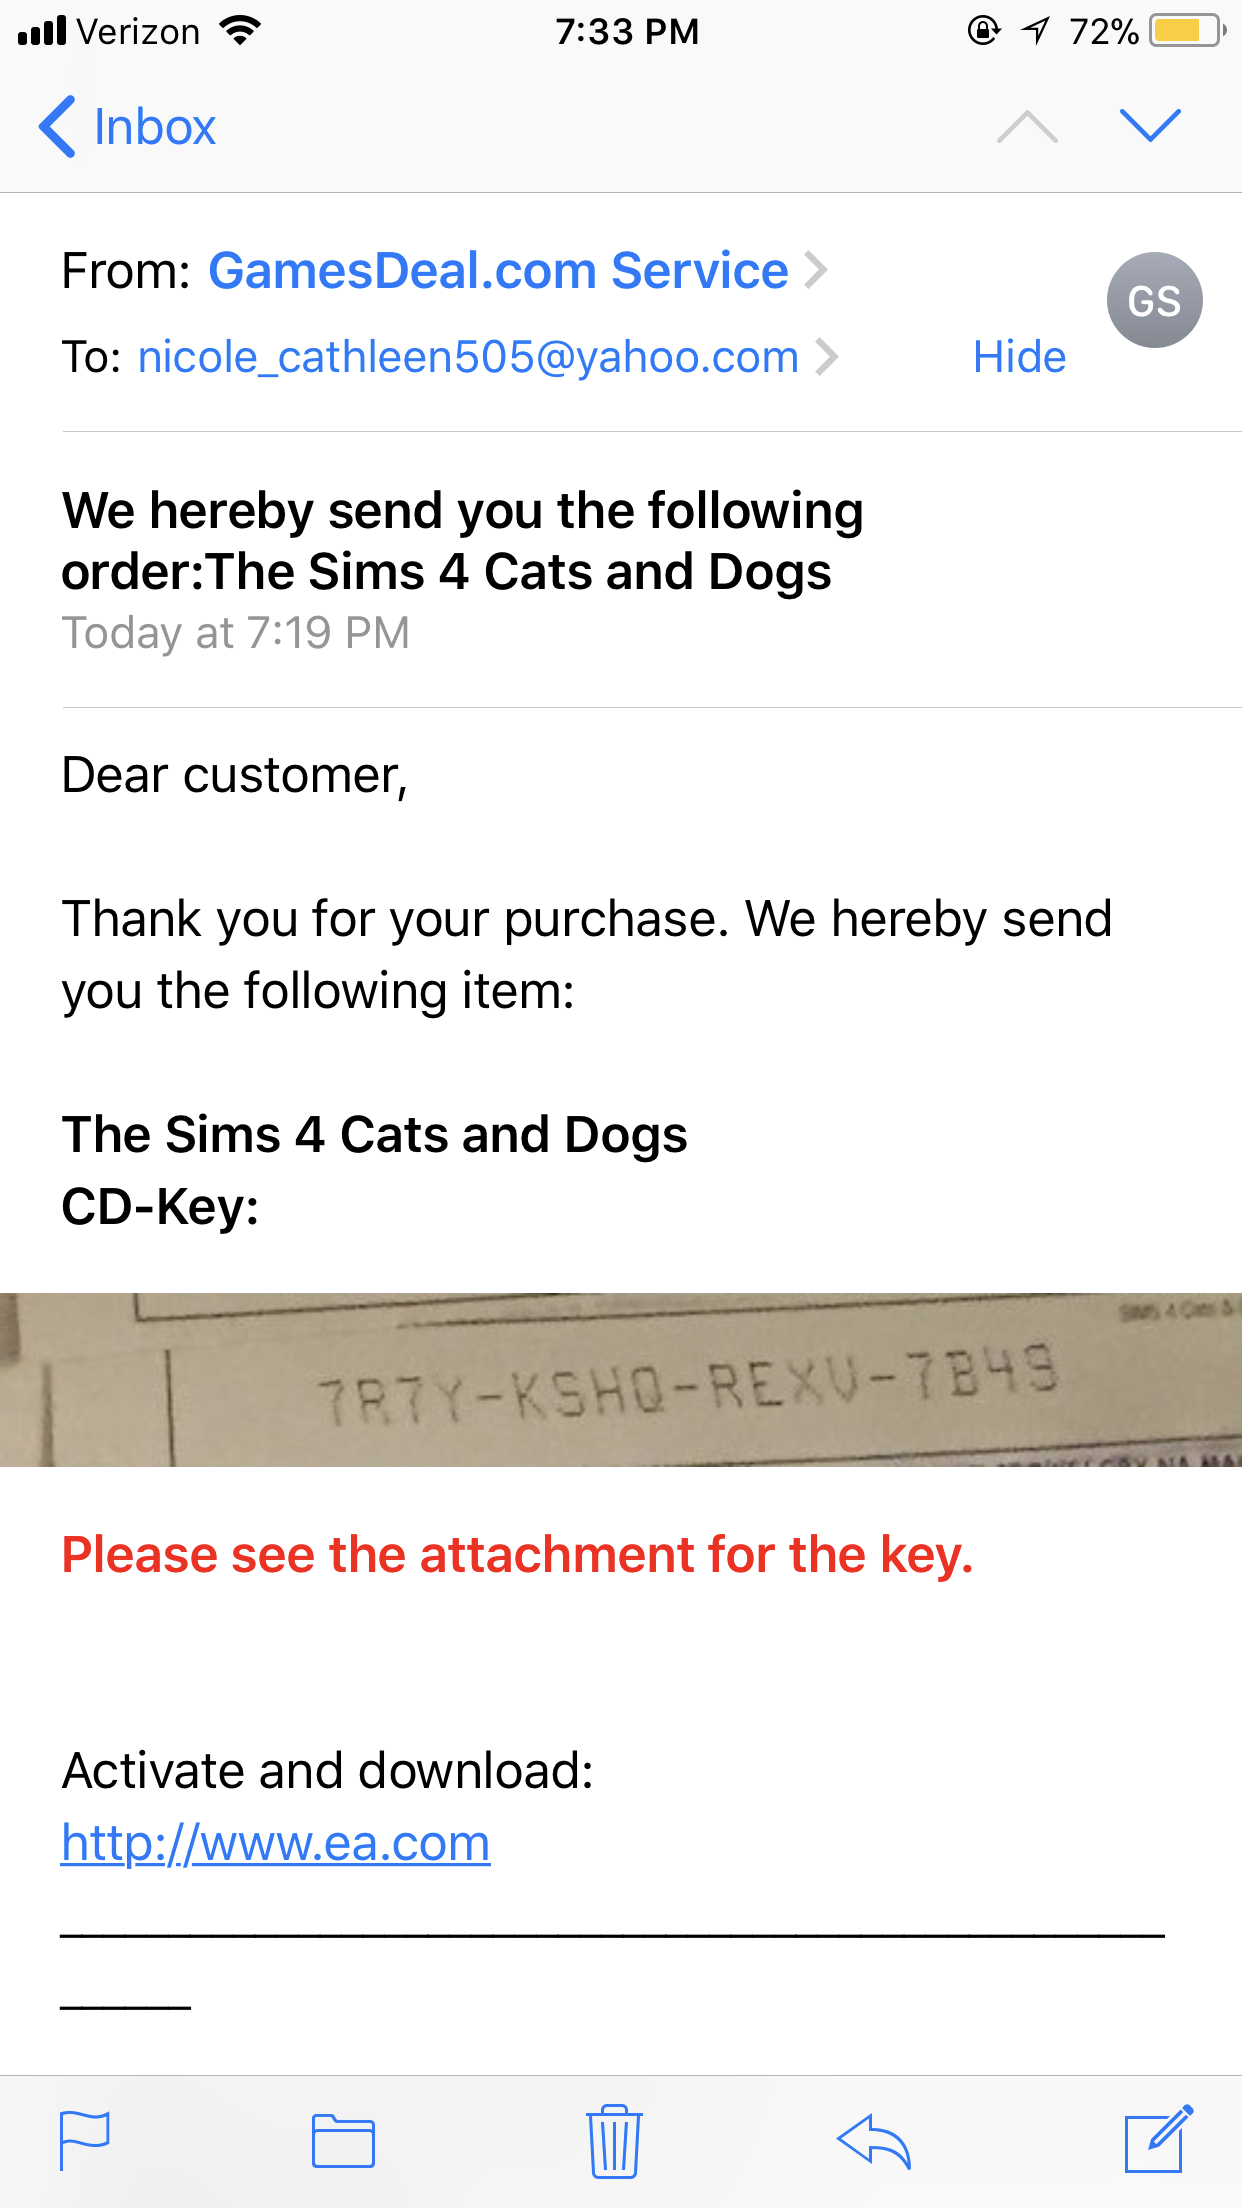 Sims 4 cats and dogs key generator online no survey